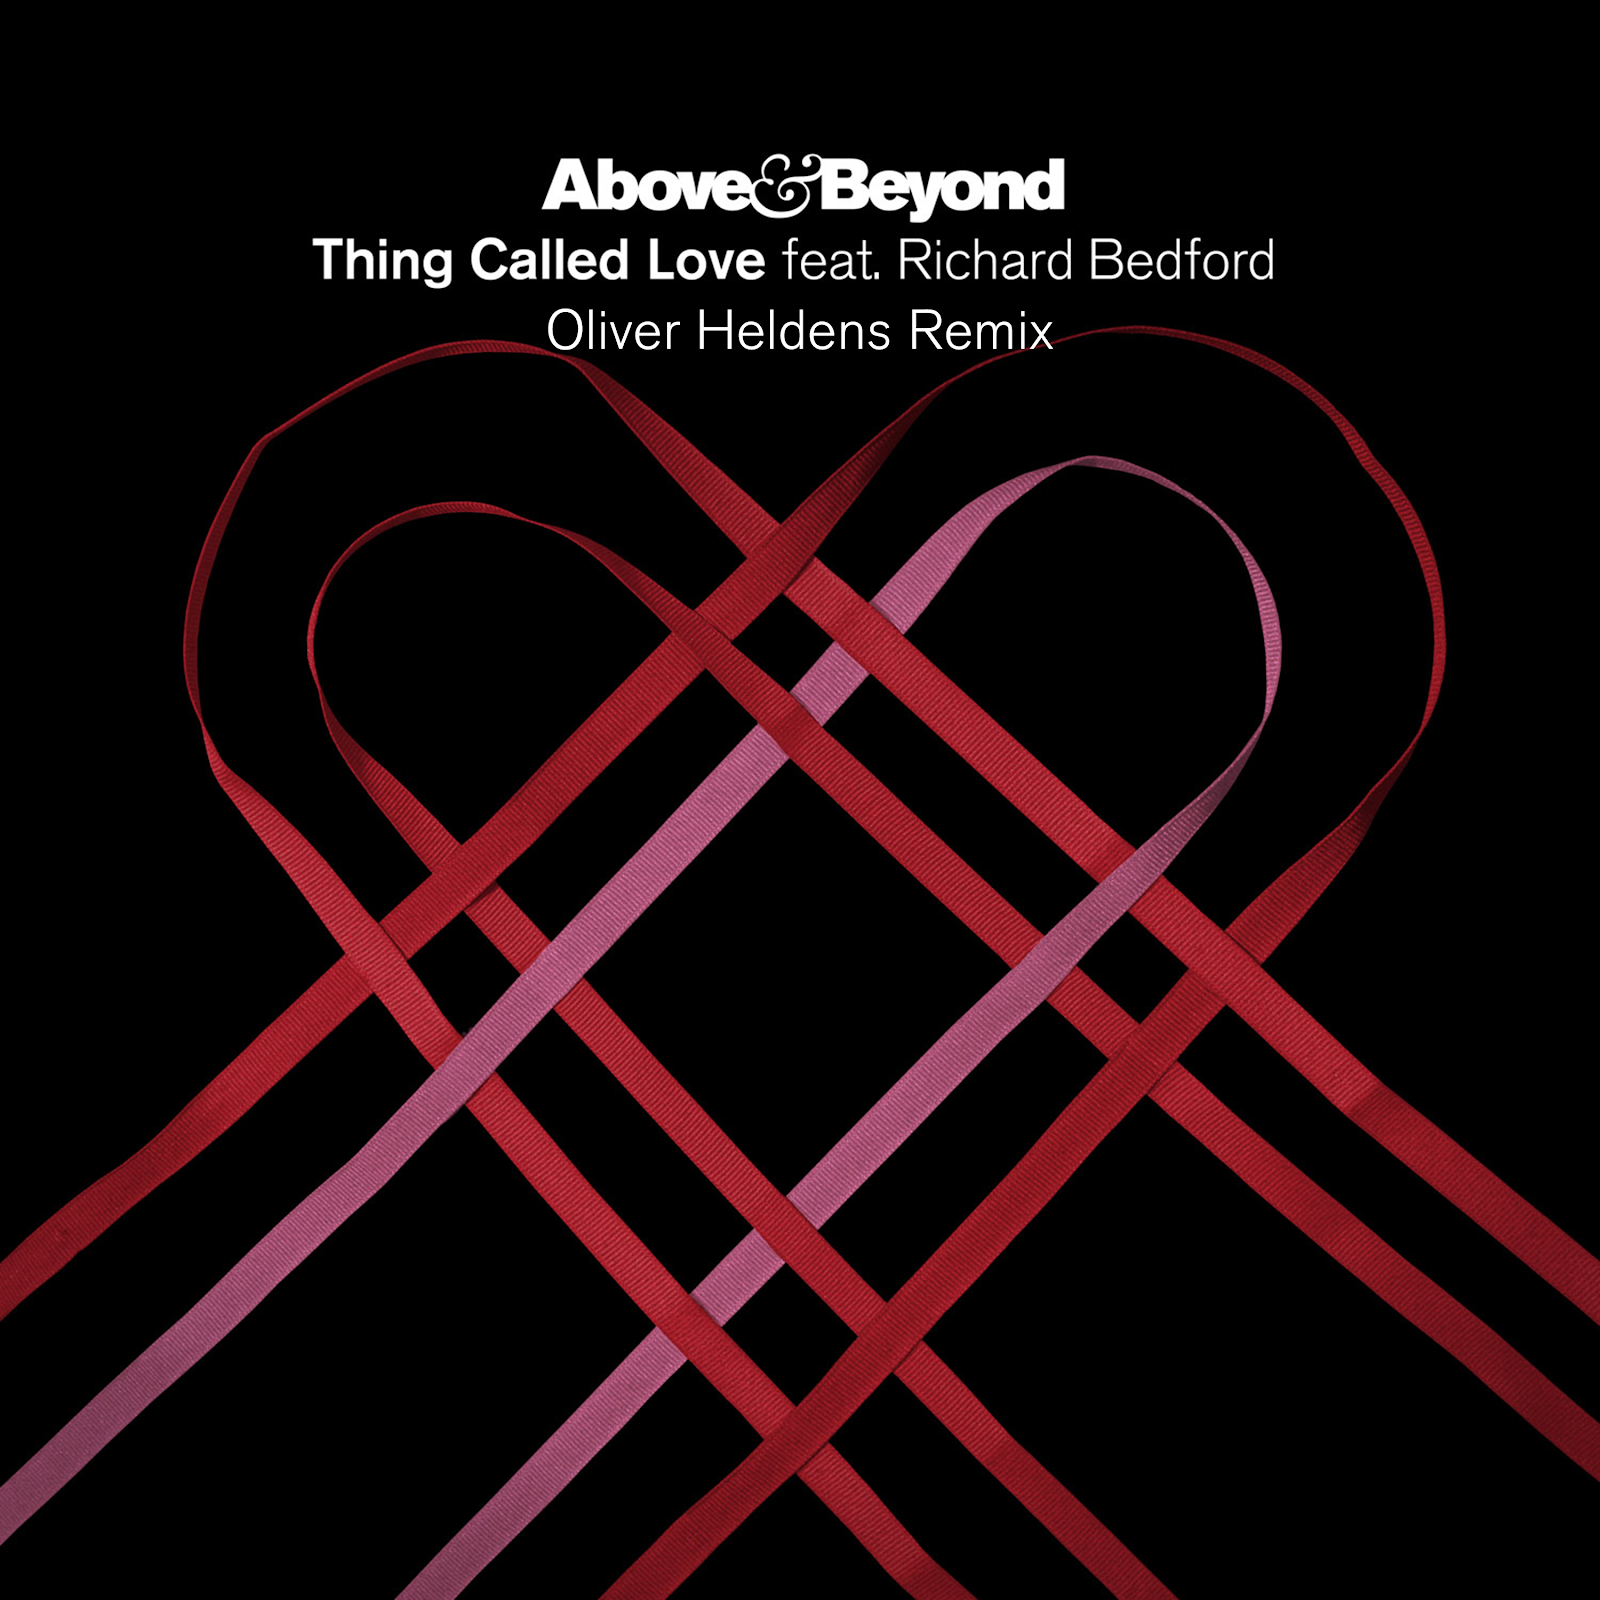 Above and Beyond feat. Richard Bedford presents Thing Called Love (Oliver Heldens Remix) on Anjunabeats